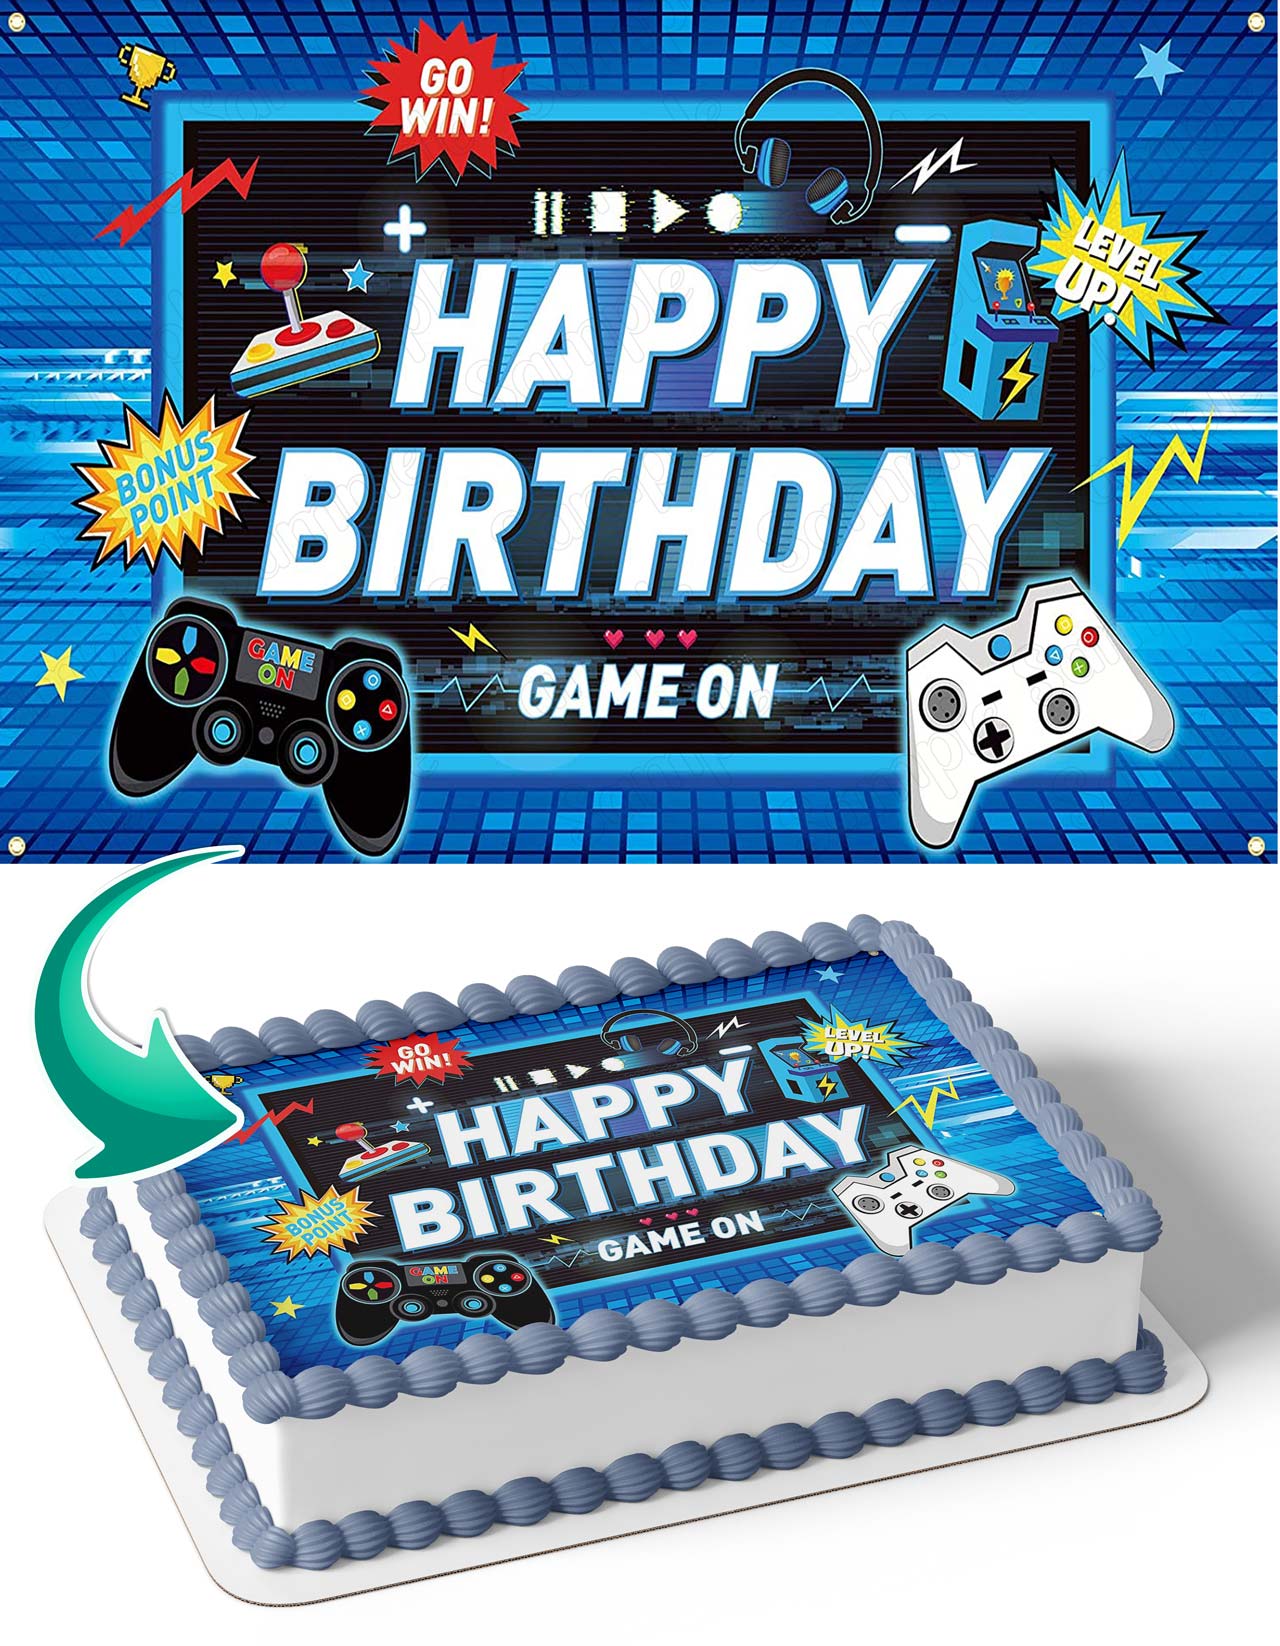 Shop for Fresh Free Fire Game Theme Birthday Cake online - Lucknow